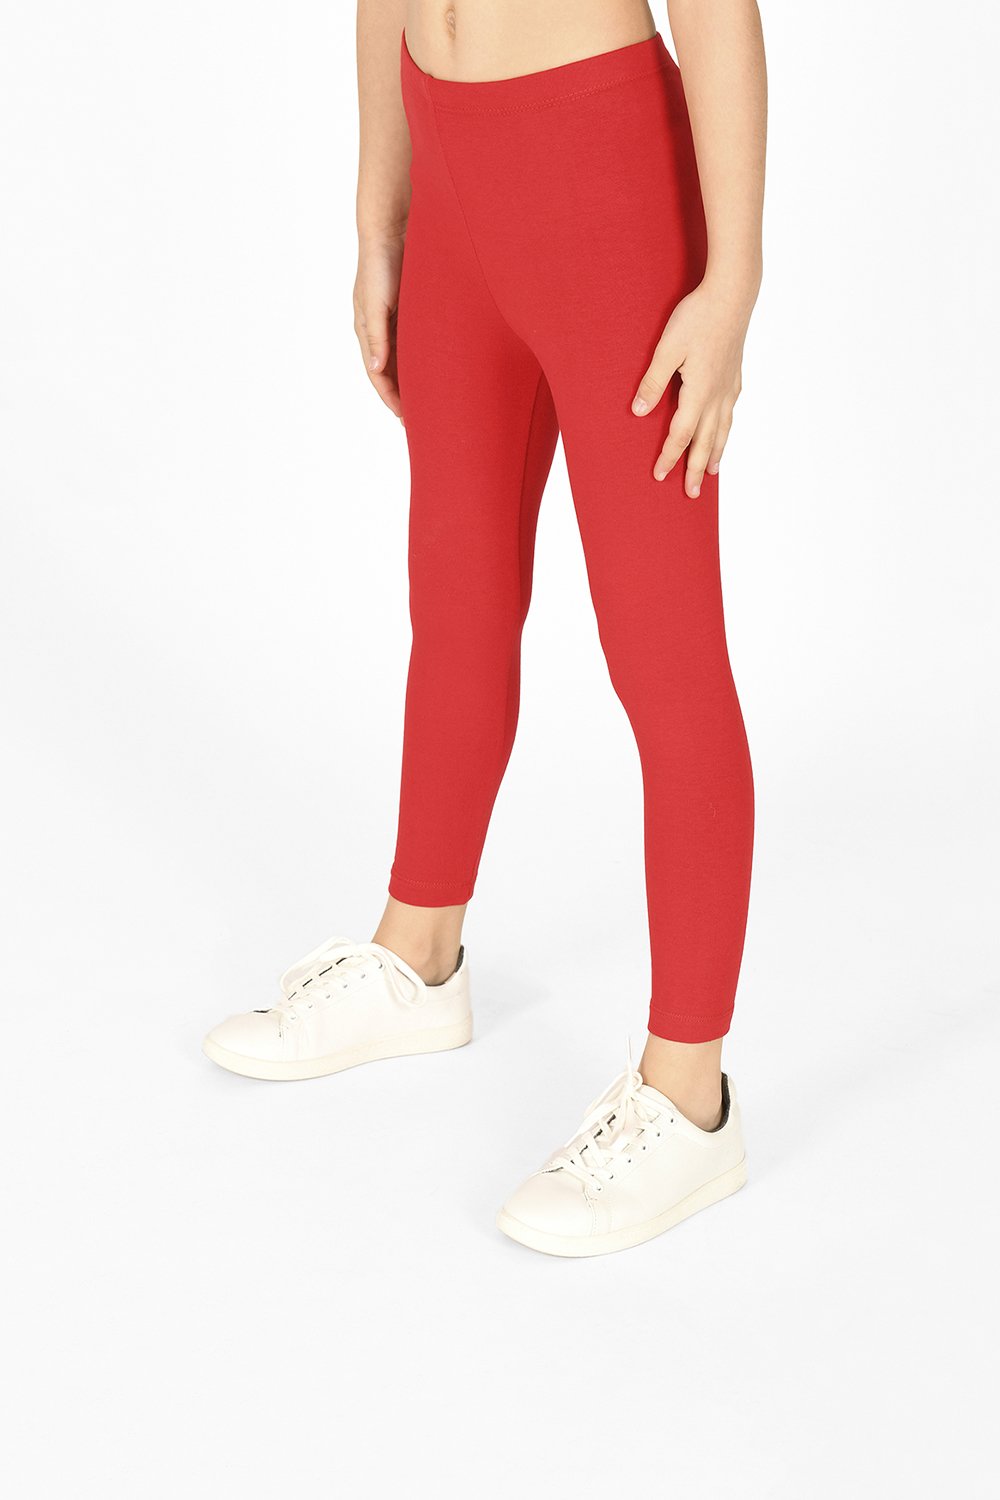 Kids Red Sparkly Jewel Leggings | Coquetry Clothing